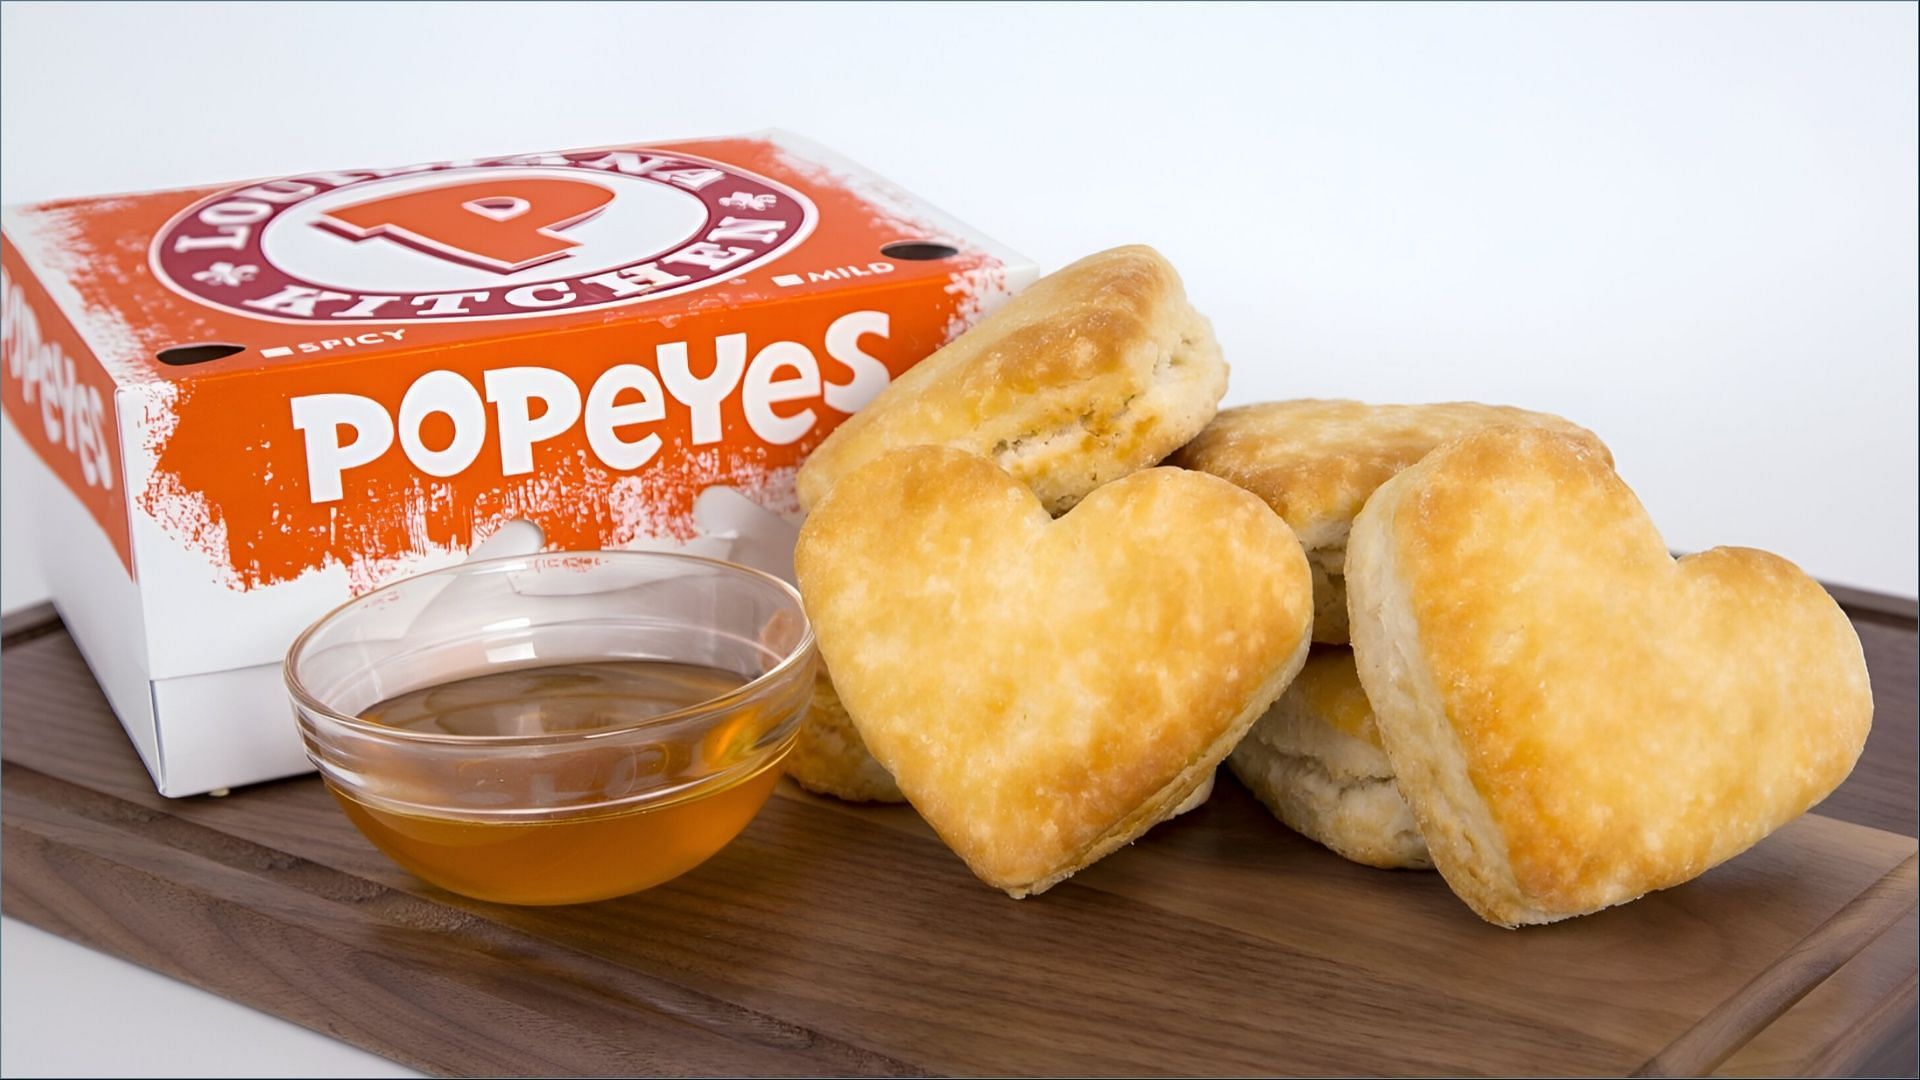 Popeyes brings back heart-shaped Strawberry Biscuits this Monday (Image via Popeyes)